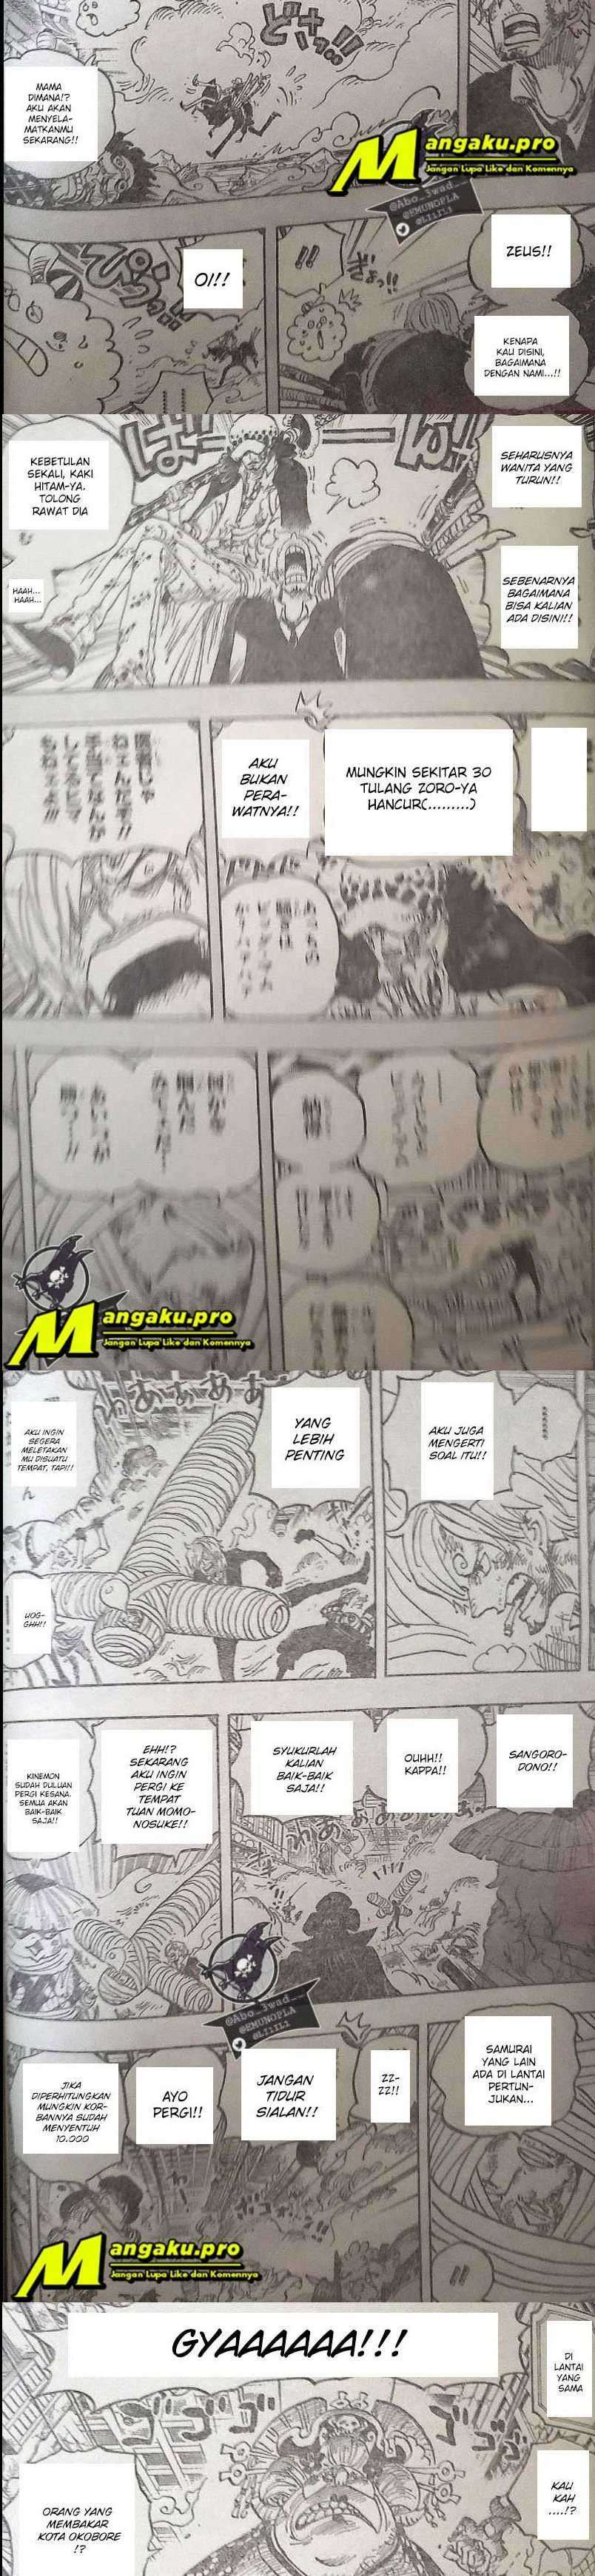 One Piece Chapter 1012 lq Image 3